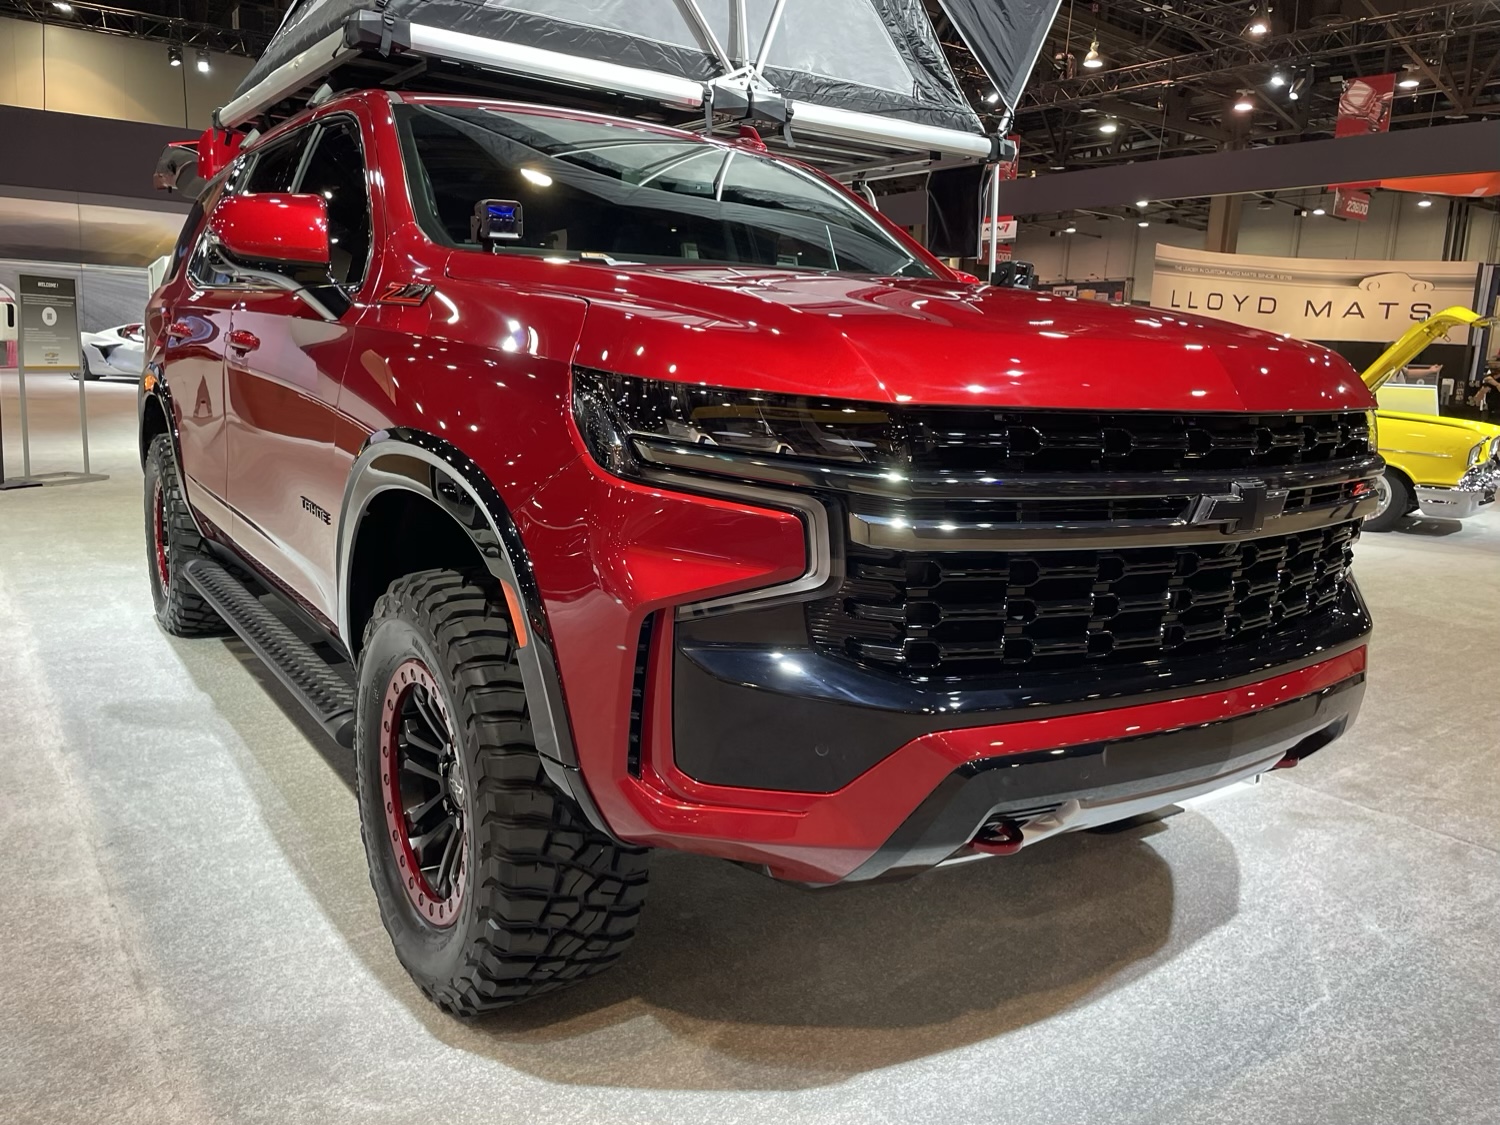 2022 Chevy Tahoe Z71 Overlanding Concept: Live Photo Gallery